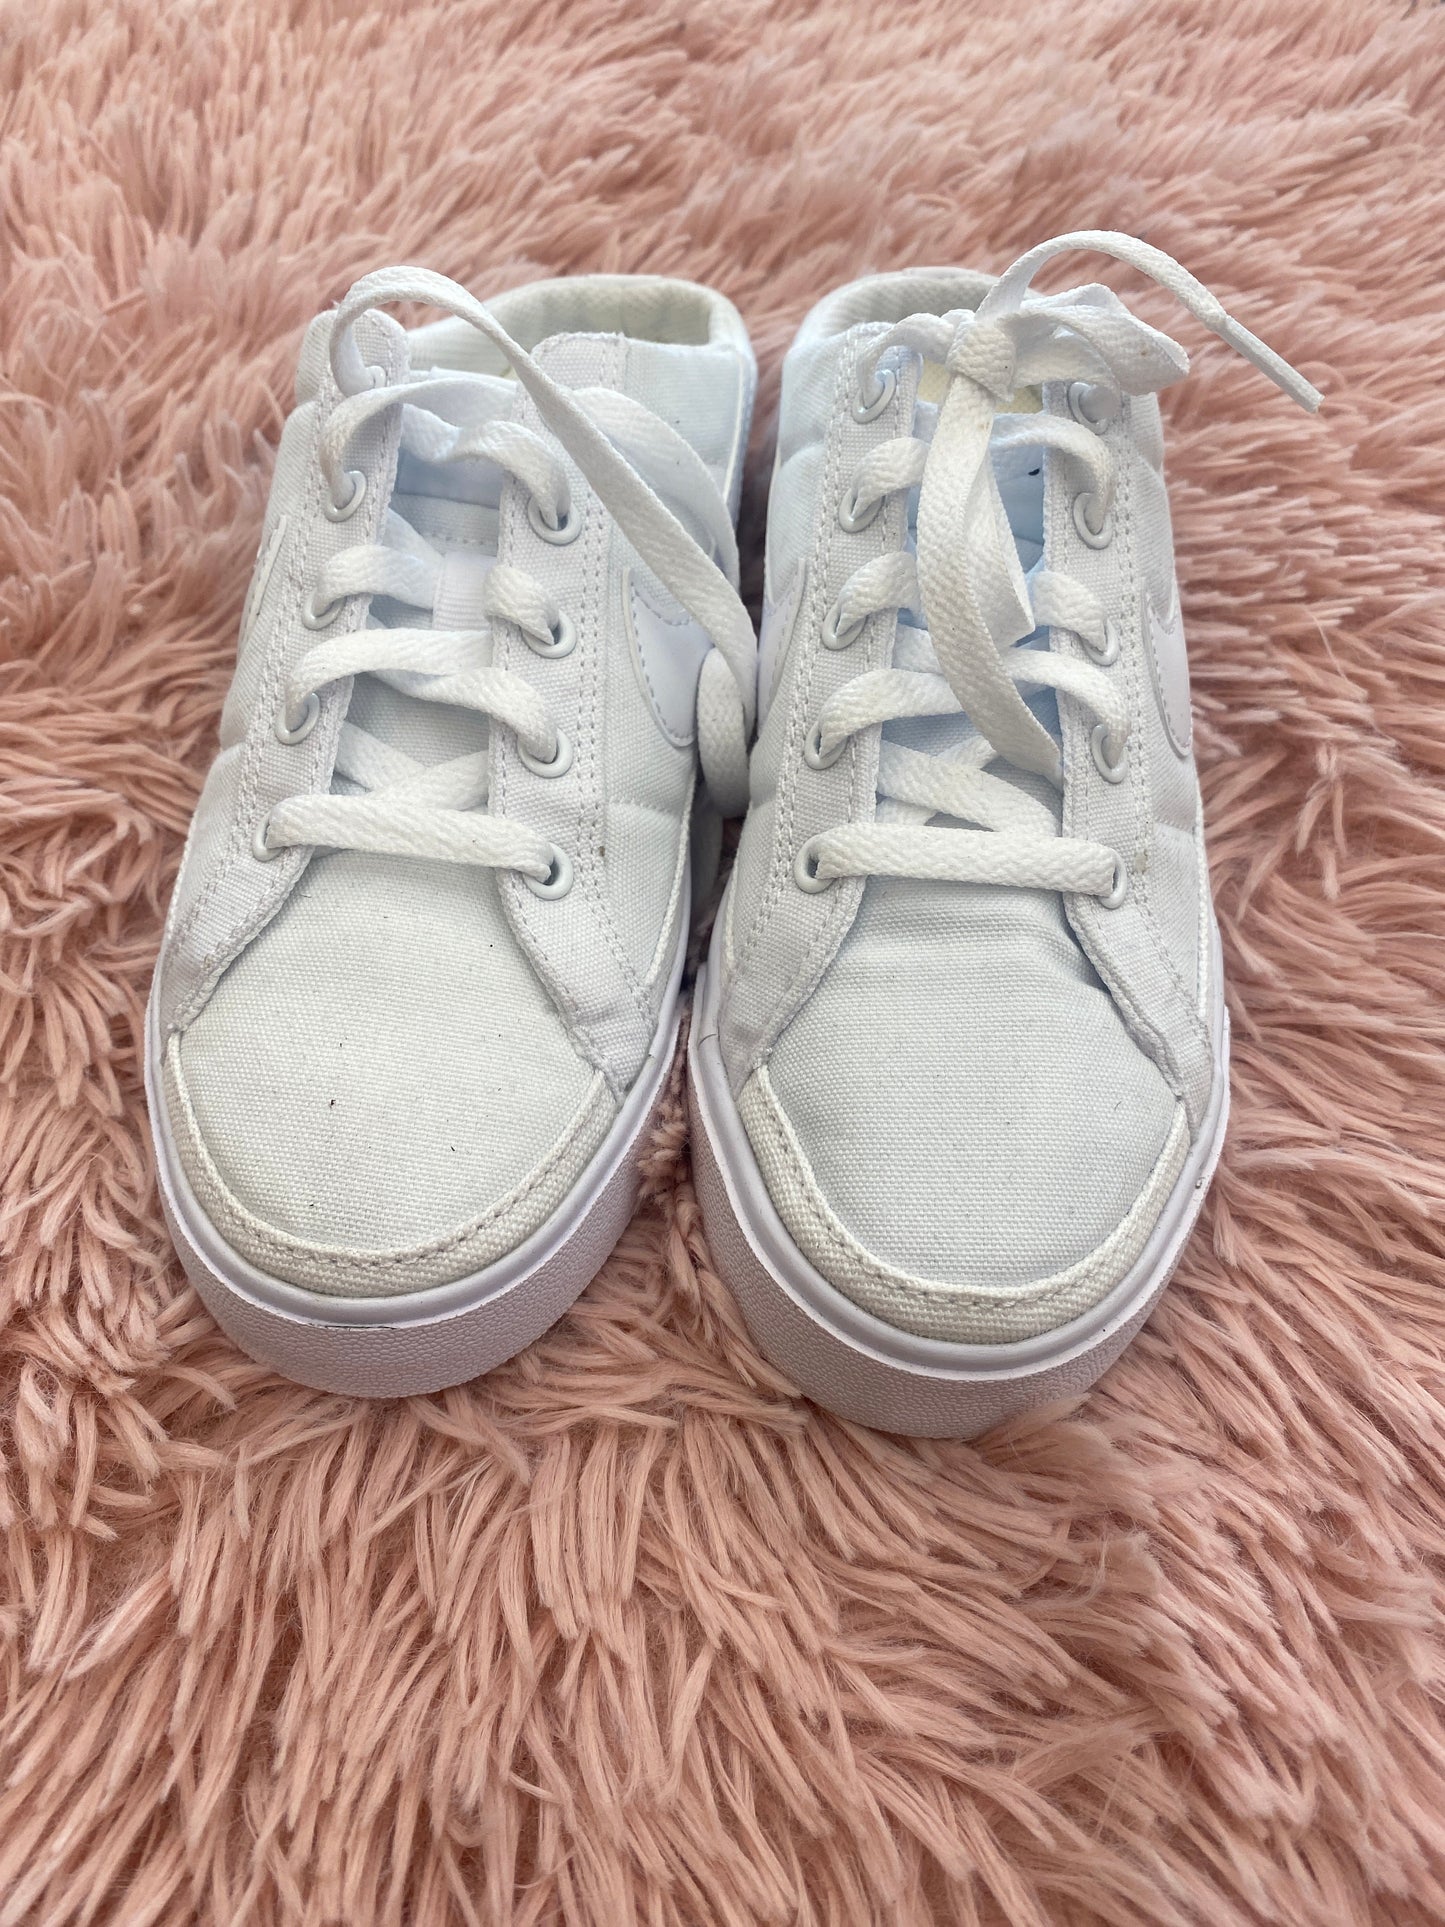 White Shoes Sneakers Nike Apparel, Size 6